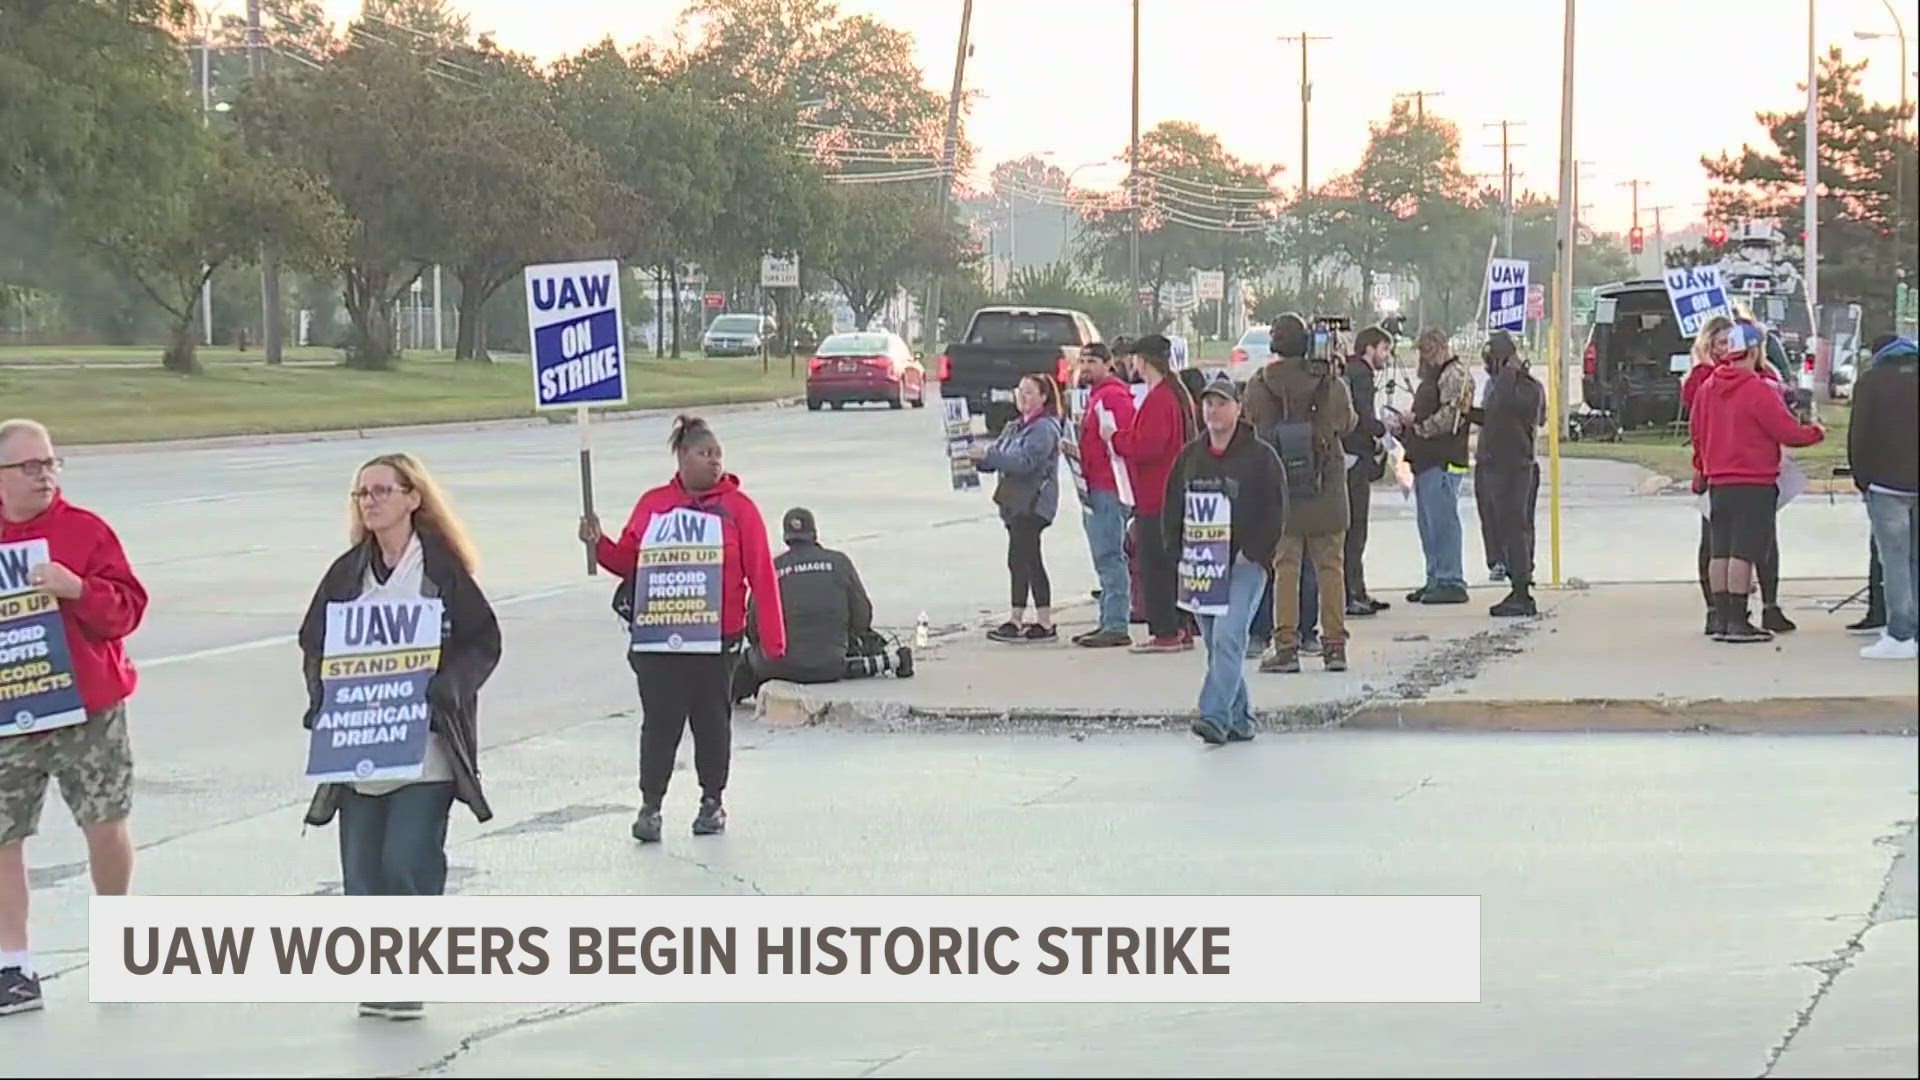 As of day one of the UAW strike nearly 13,000 workers have walked off the job.